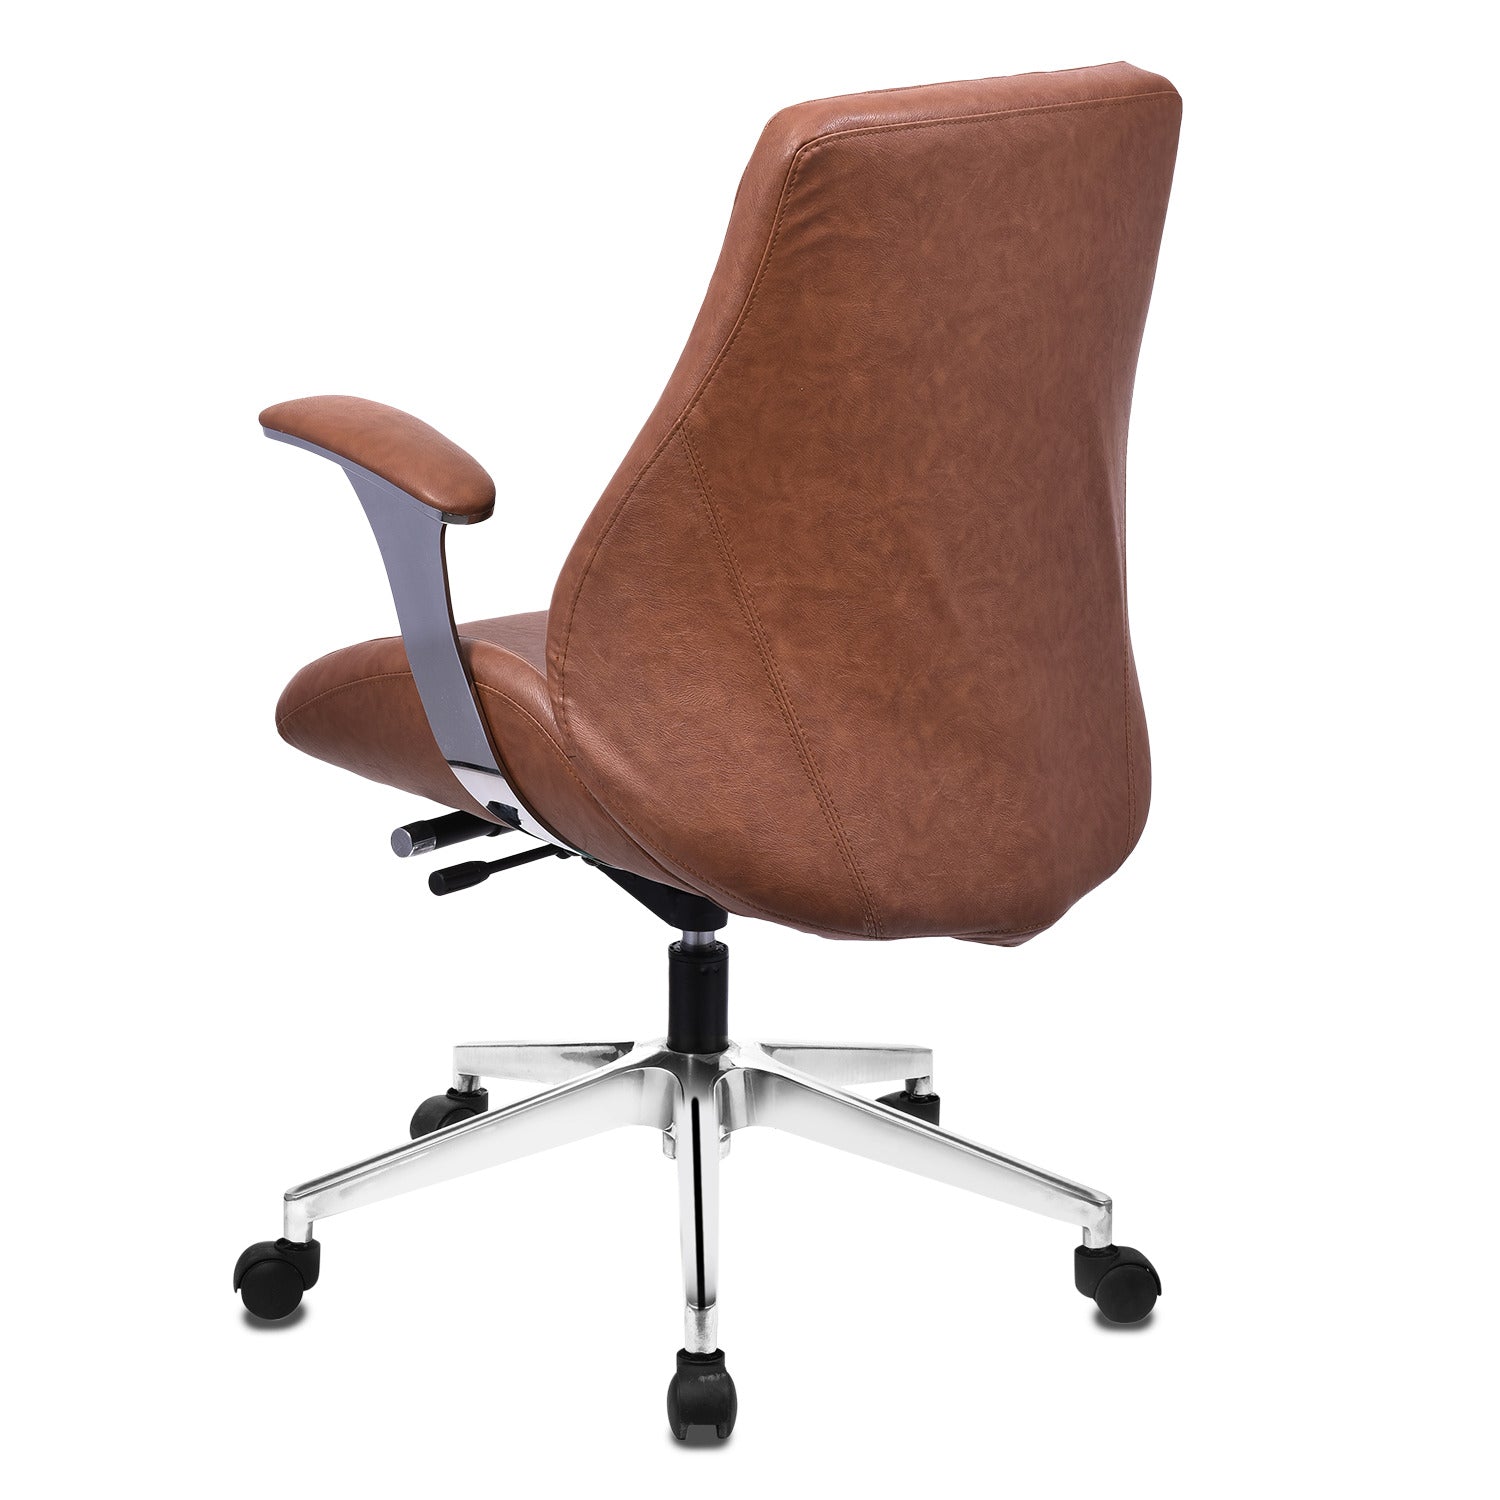 ZFB1004 Medium Back Chair by Zorin in Tan Color Zorin